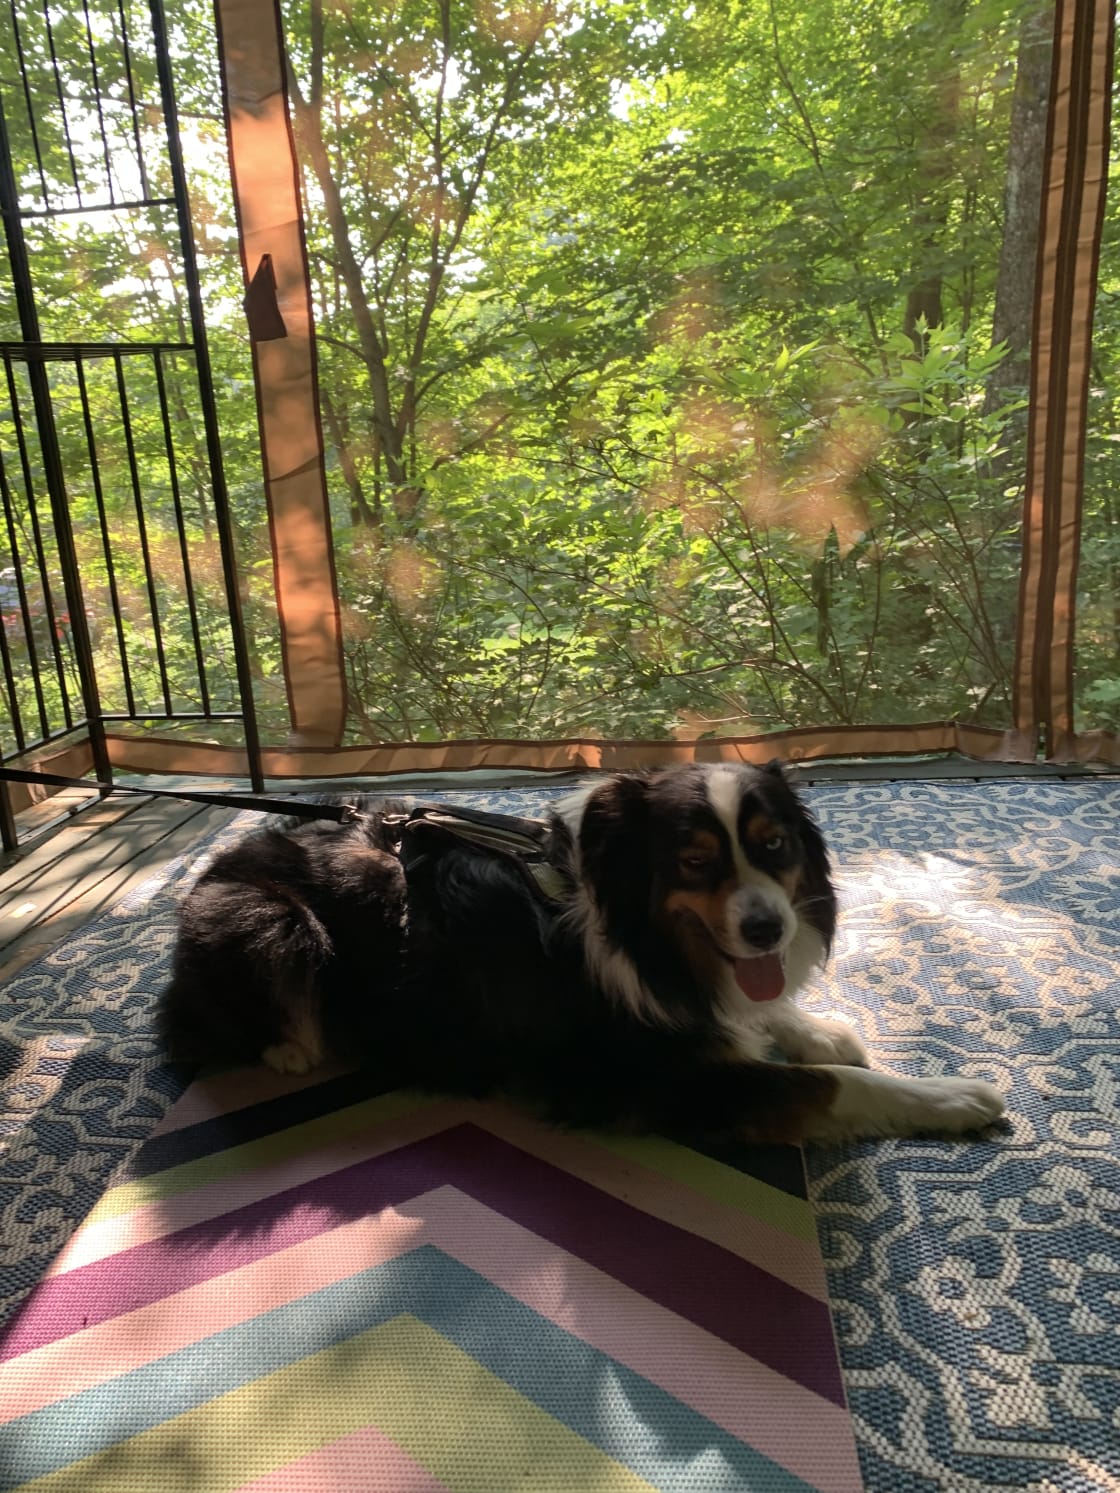 Enjoying yoga on the screened porch! We brought our own mats and loved practicing amongst the trees, bug free.